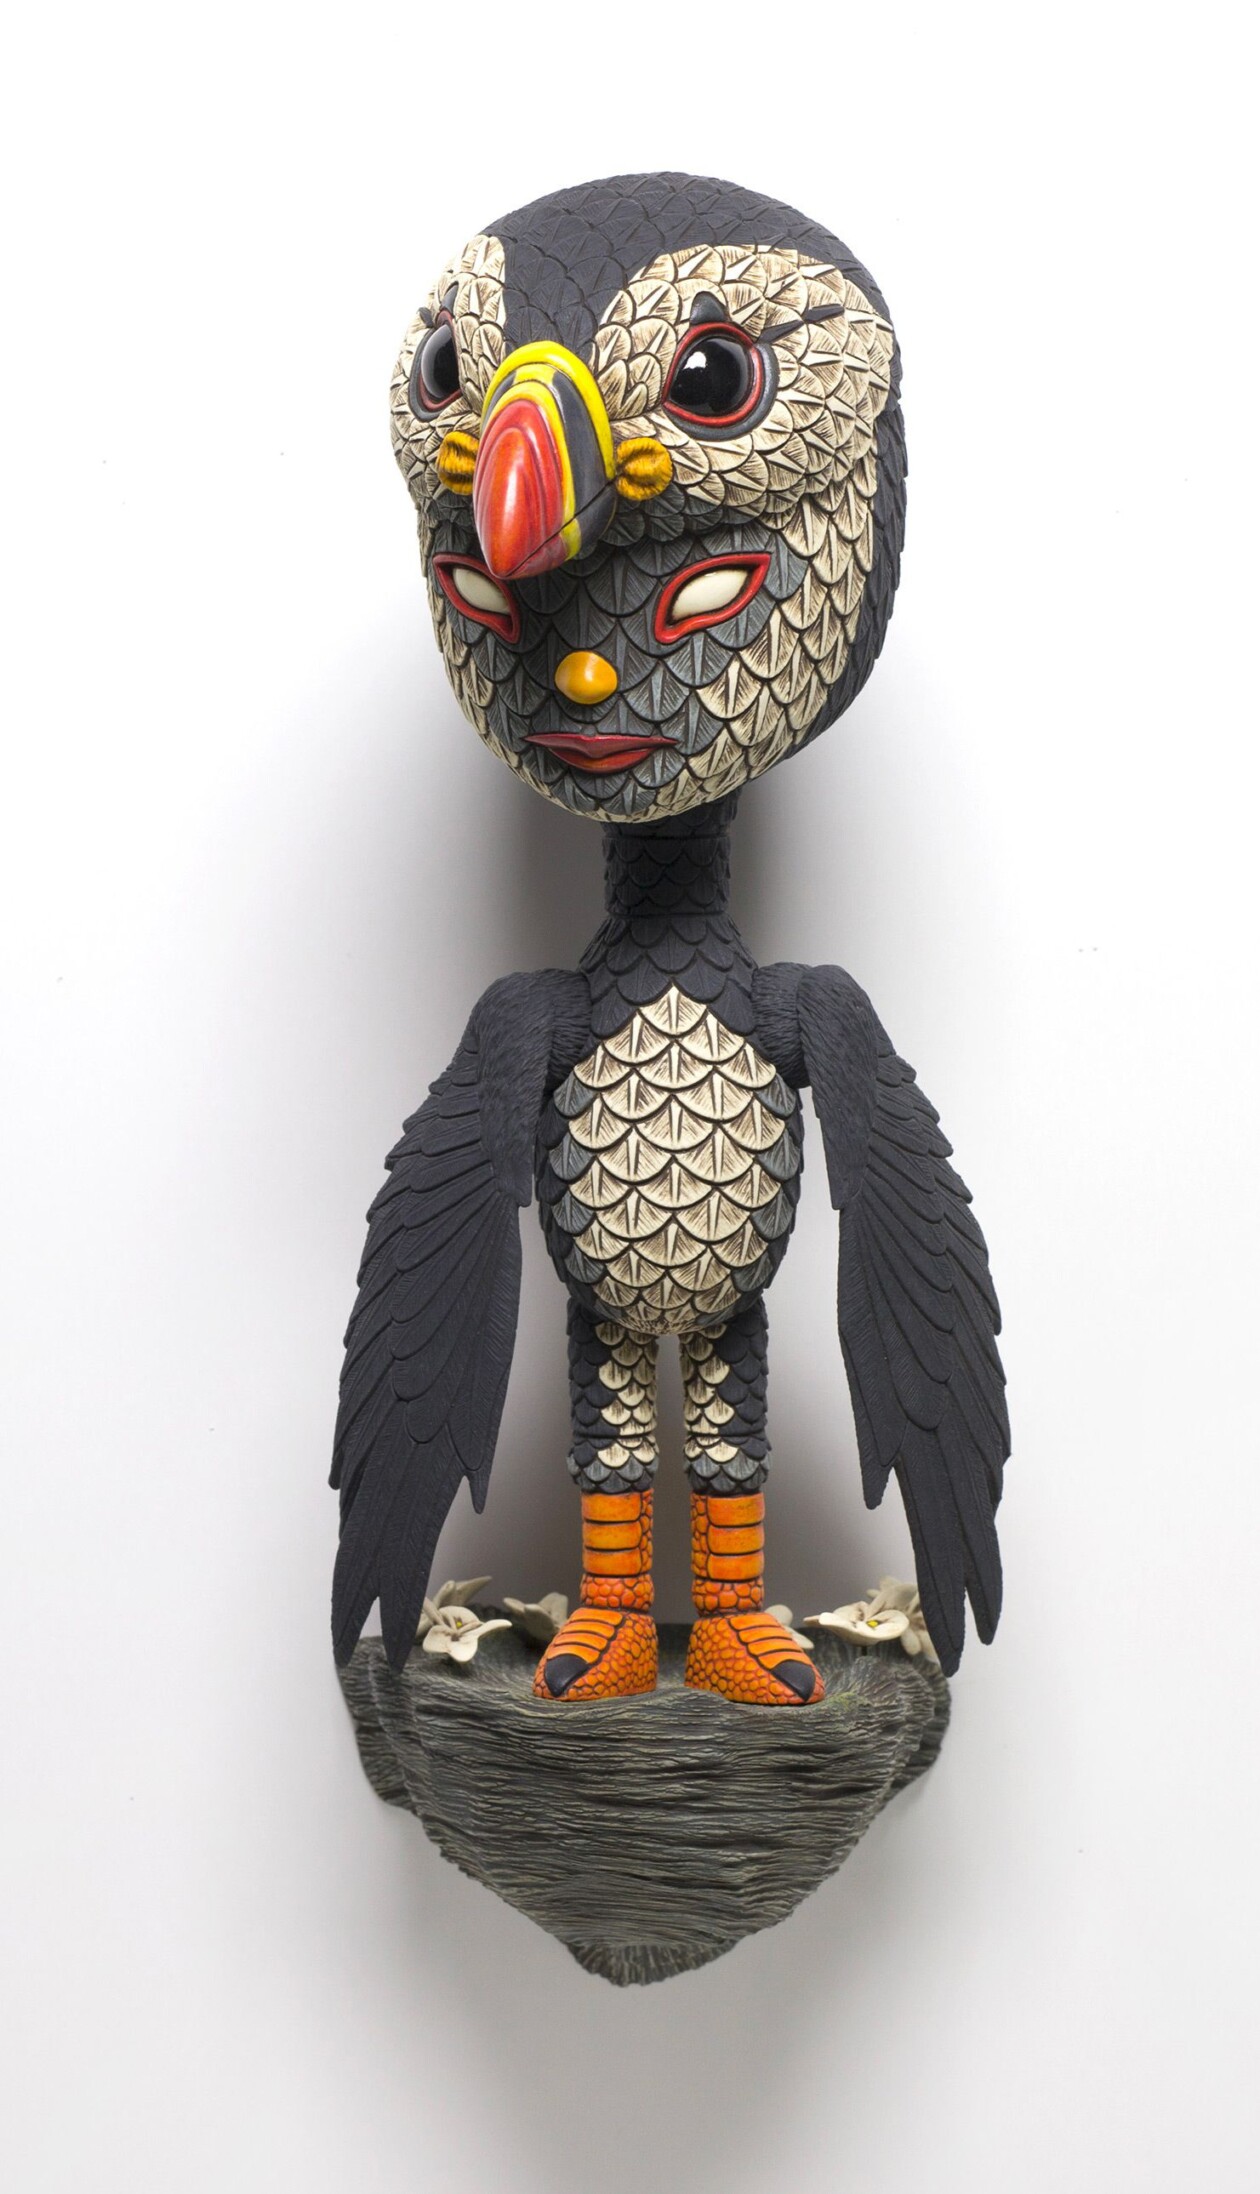 Marvelous Anthropomorphized Bird Sculptures By Calvin Ma (8)